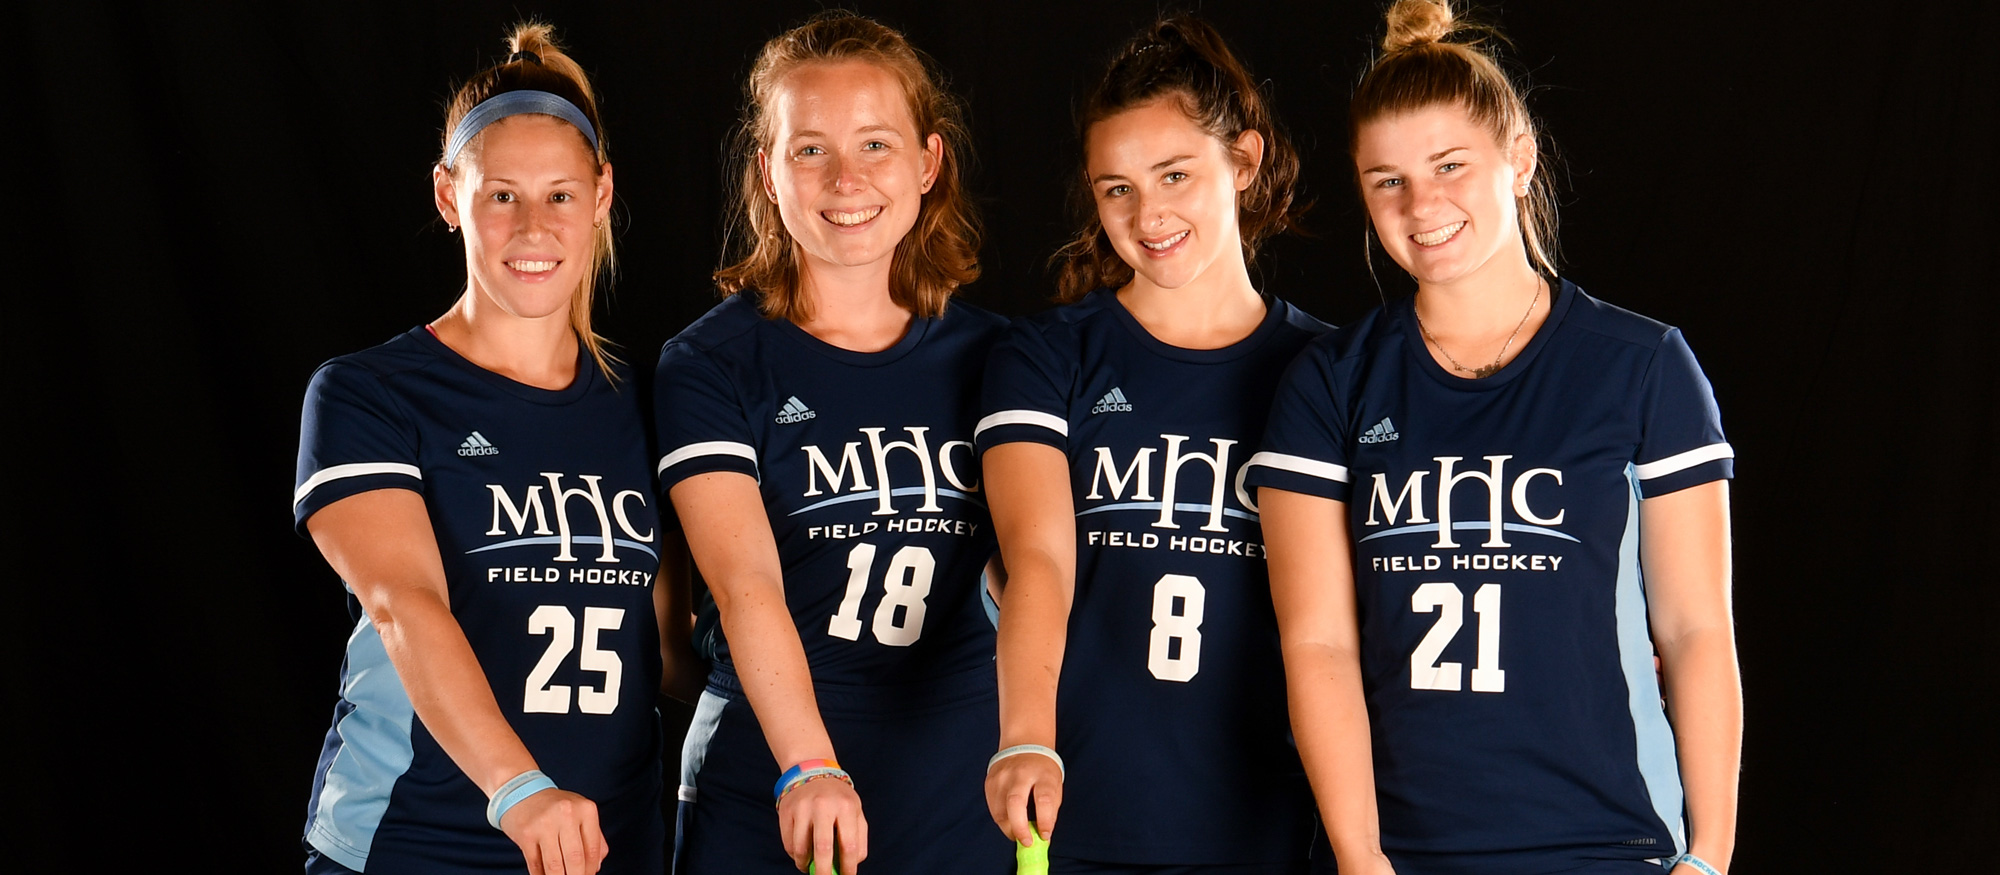 From left to right, Laurissa Montigny, Phoebe Aaronson, Kylie Brooks, and Mollee Malboeuf, Mount Holyoke field hockey's Class of 2023, was honored on Senior Day before their game against Wellesley on Oct. 22, 2022. (RJB Sports file photo)